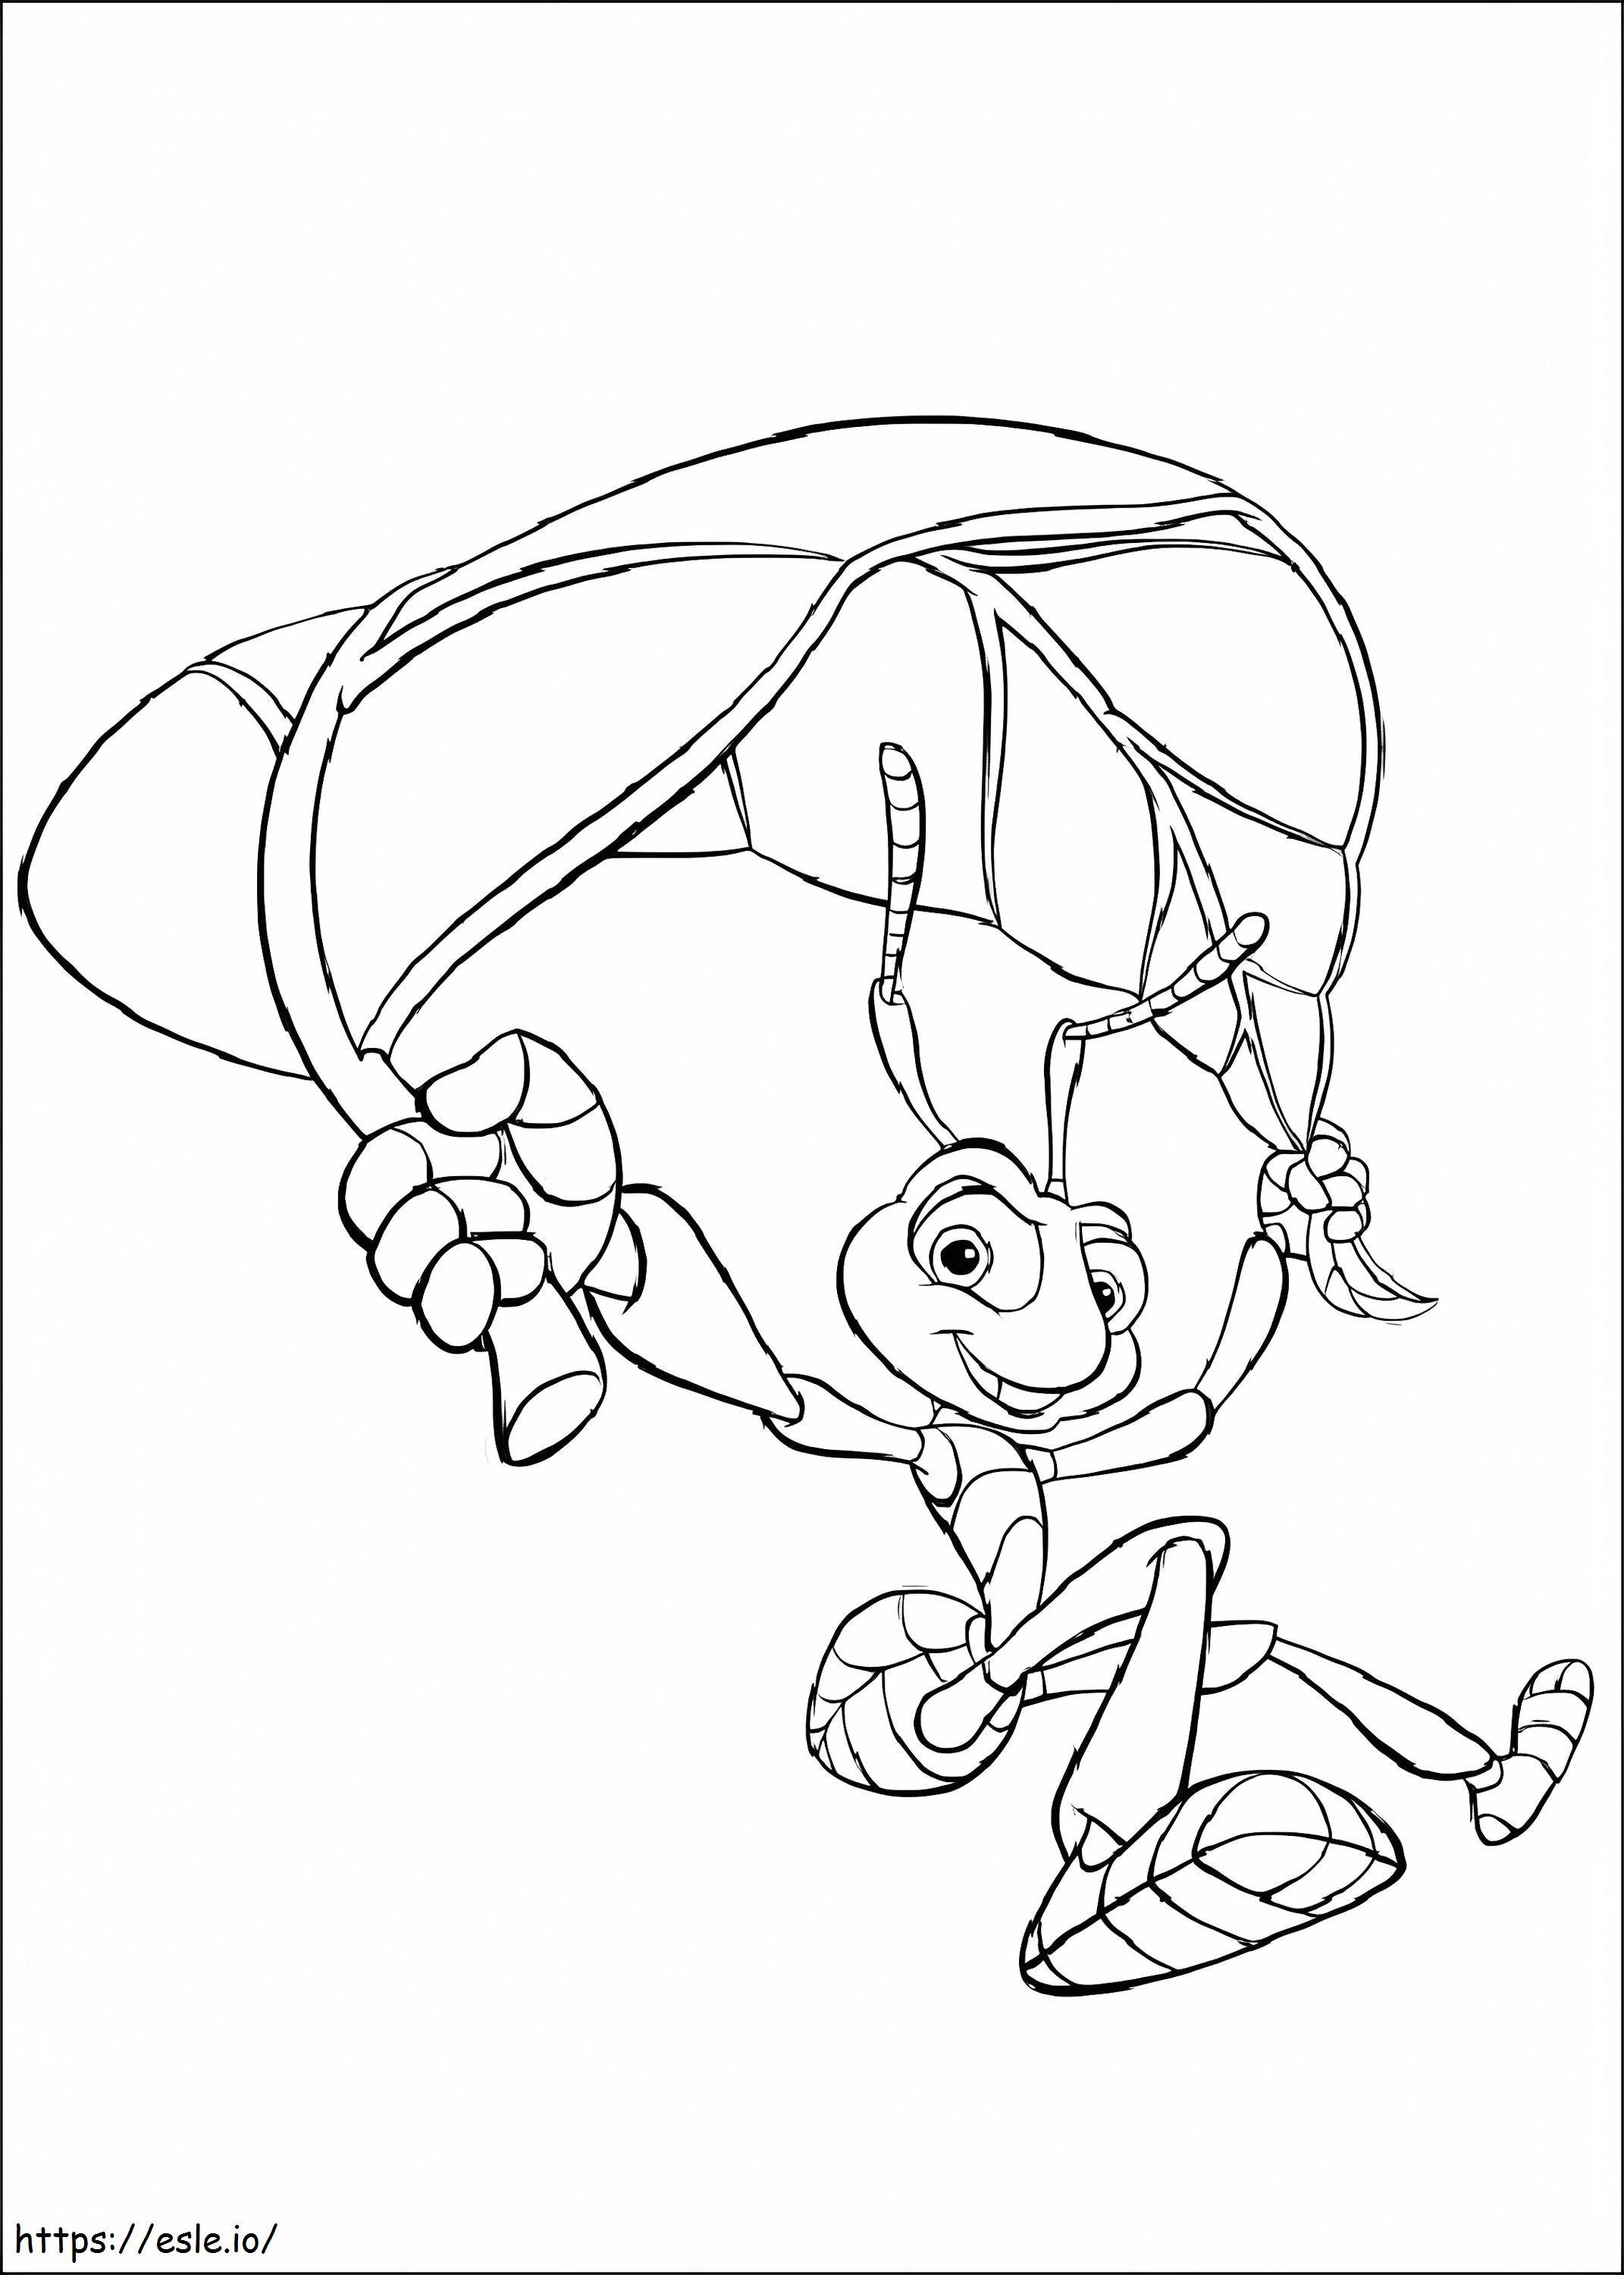 1599611114 A Bug coloring page